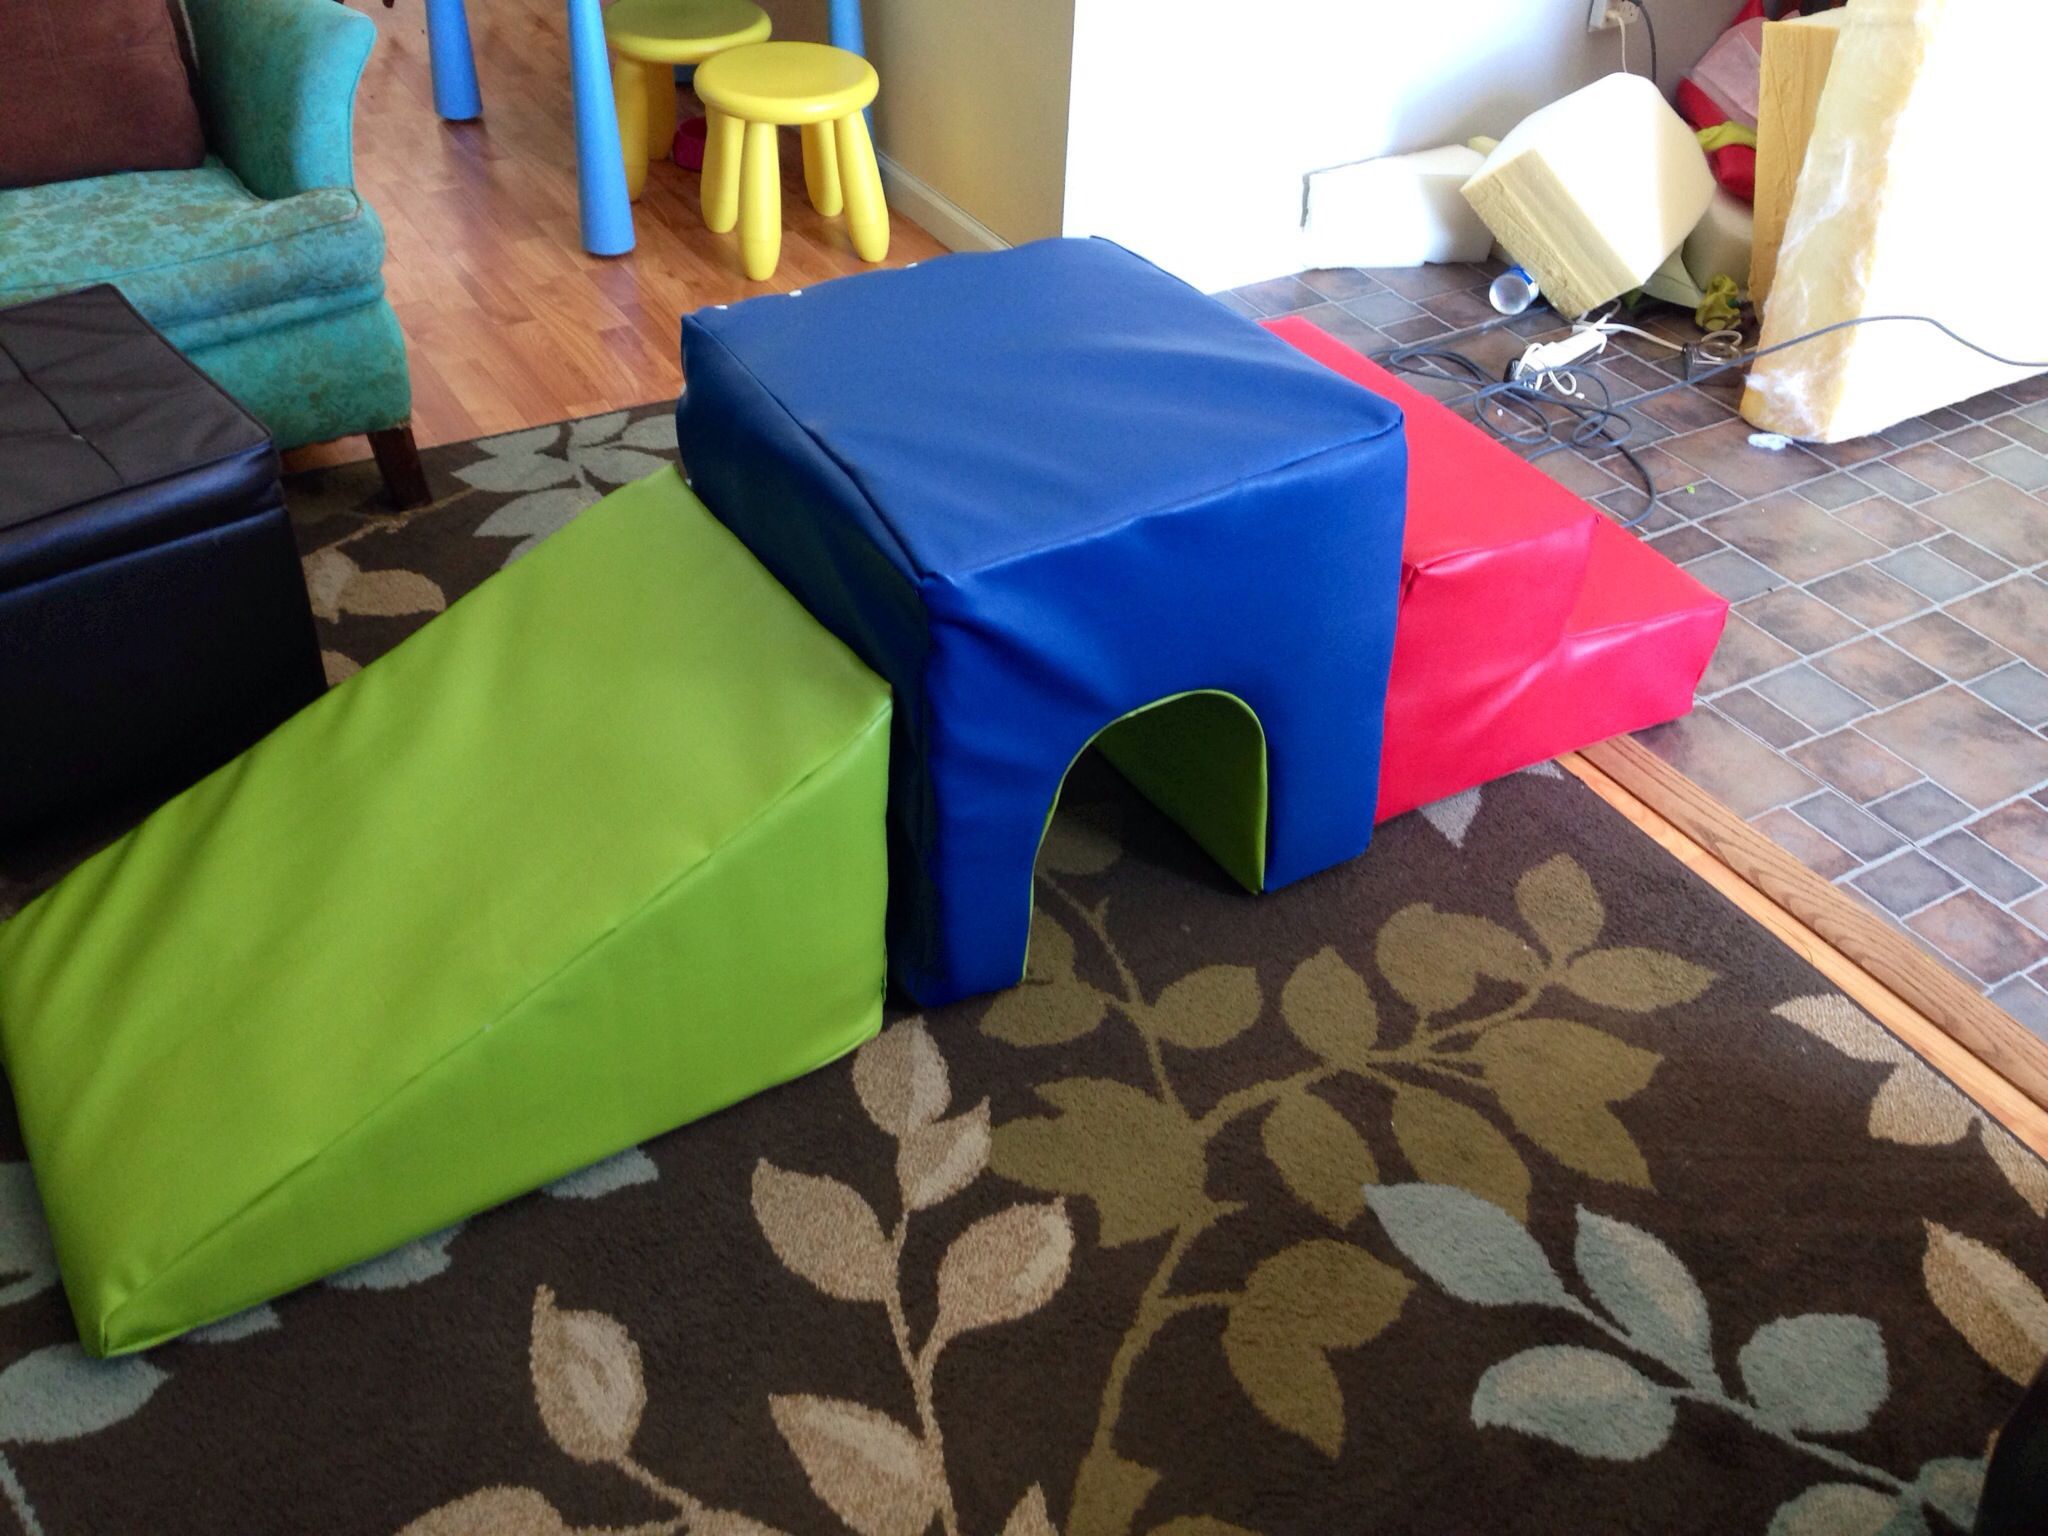 DIY Toddler Climbing Toys
 Made these giant foam climbing blocks for my kids this was